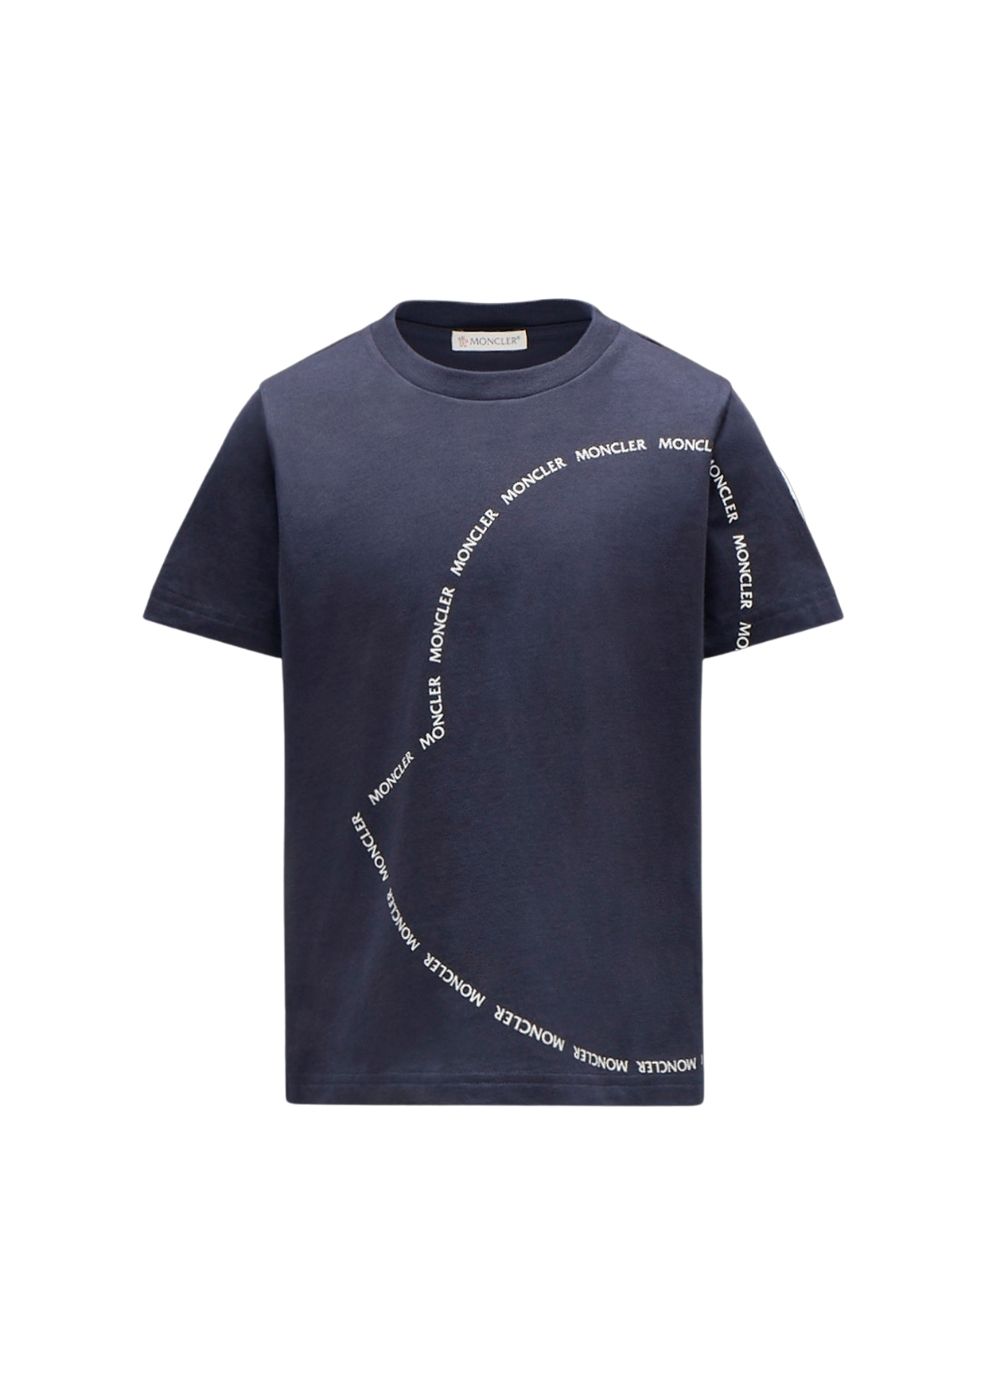 Featured image for “Moncler T-shirt Profilo Logo”